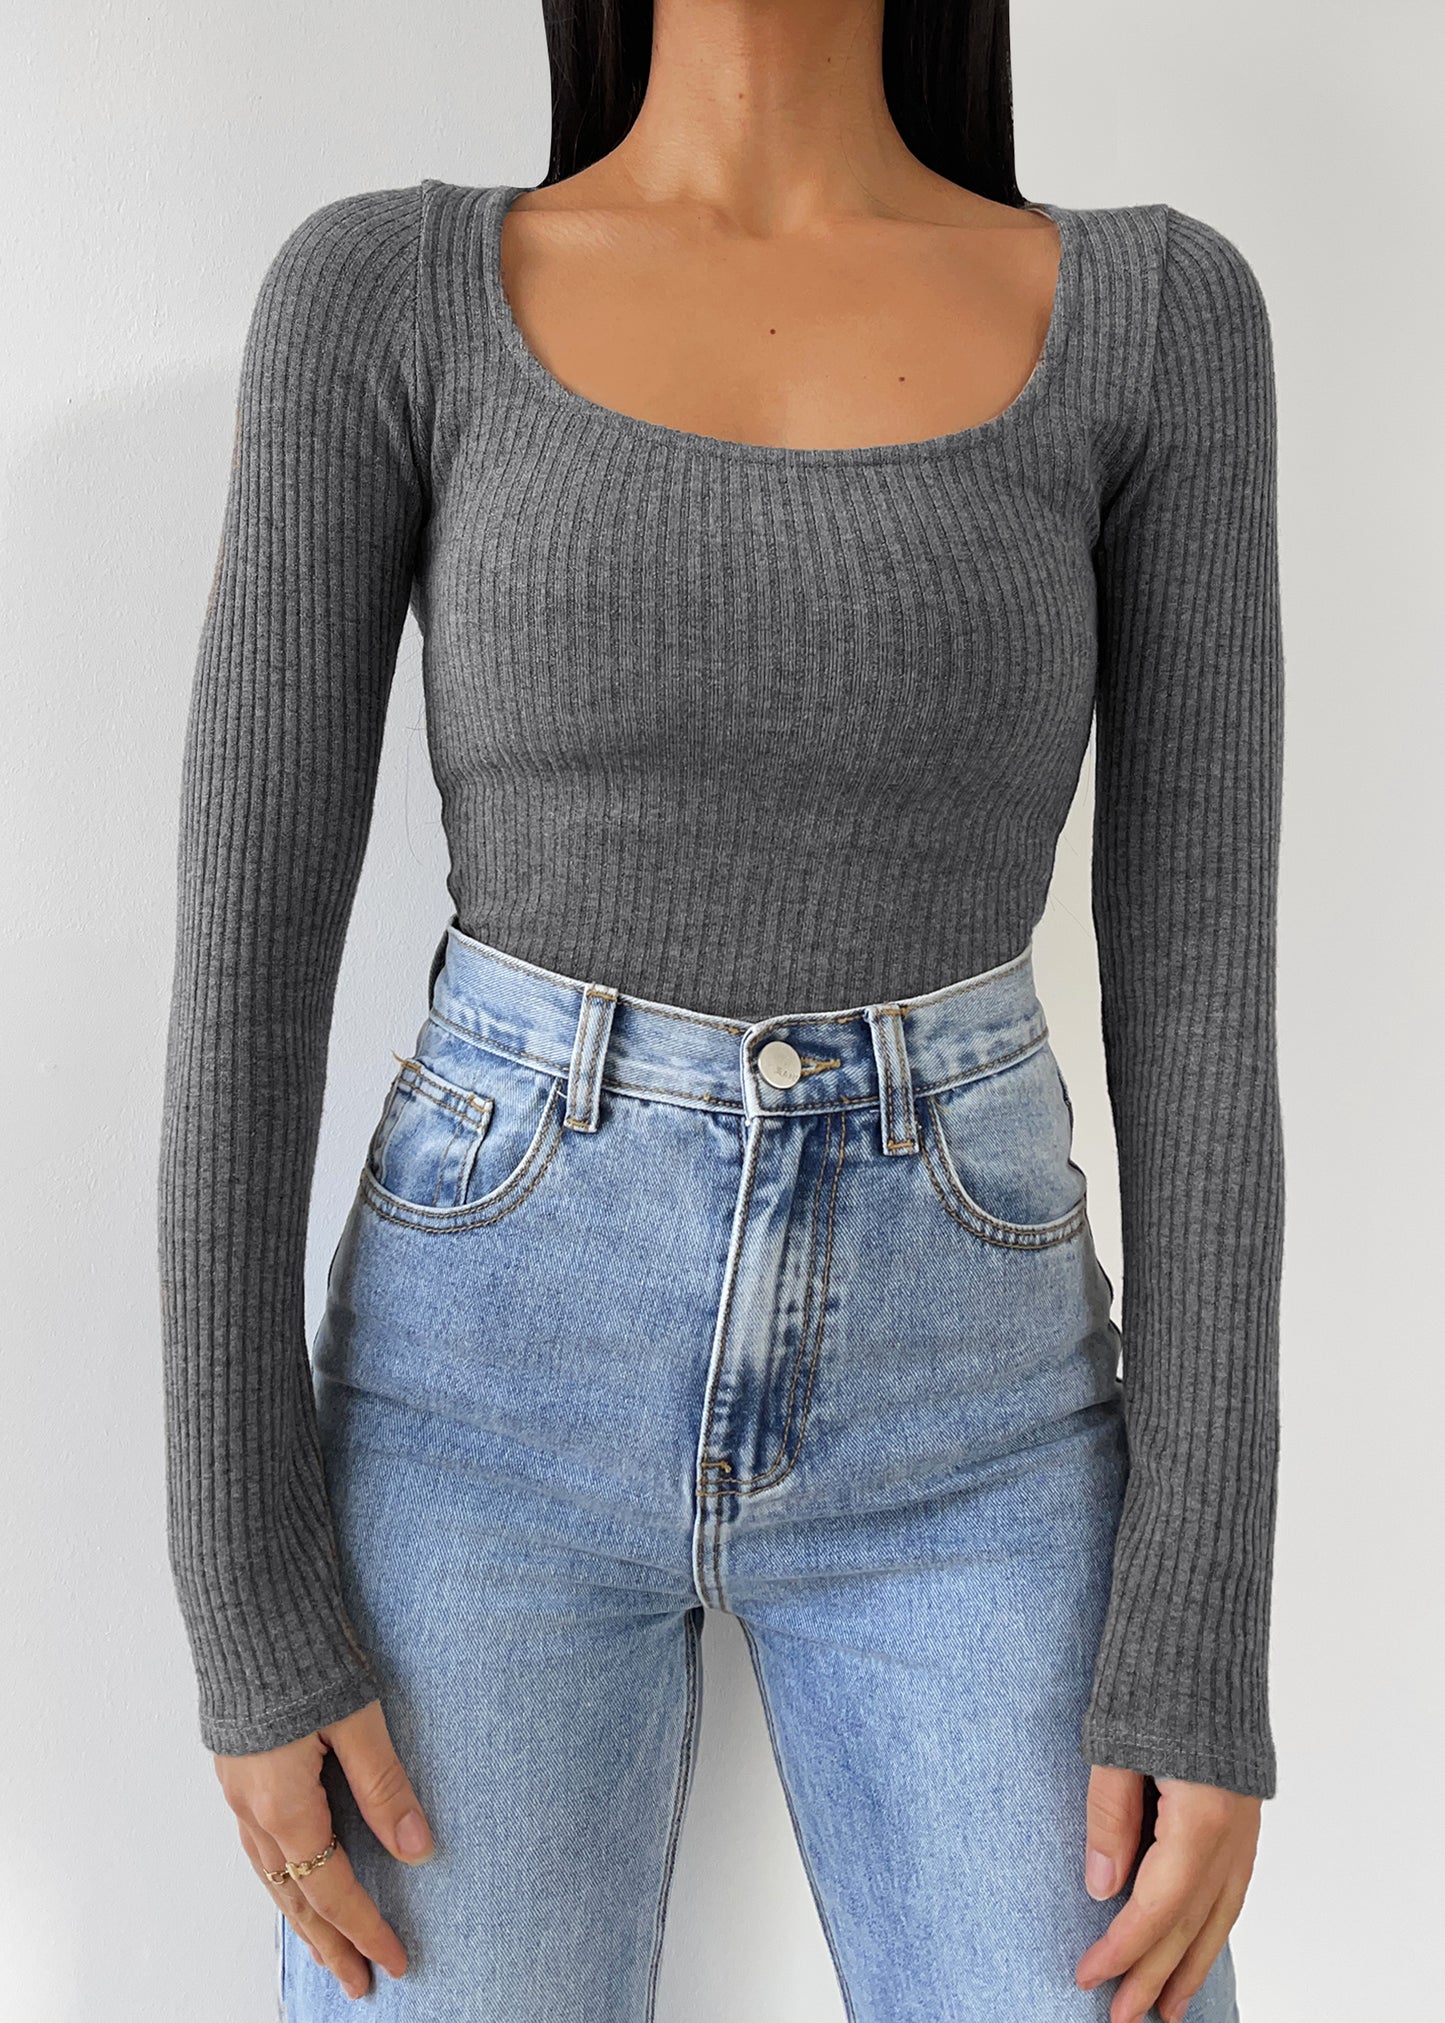 Ribbed top with square neck in grey